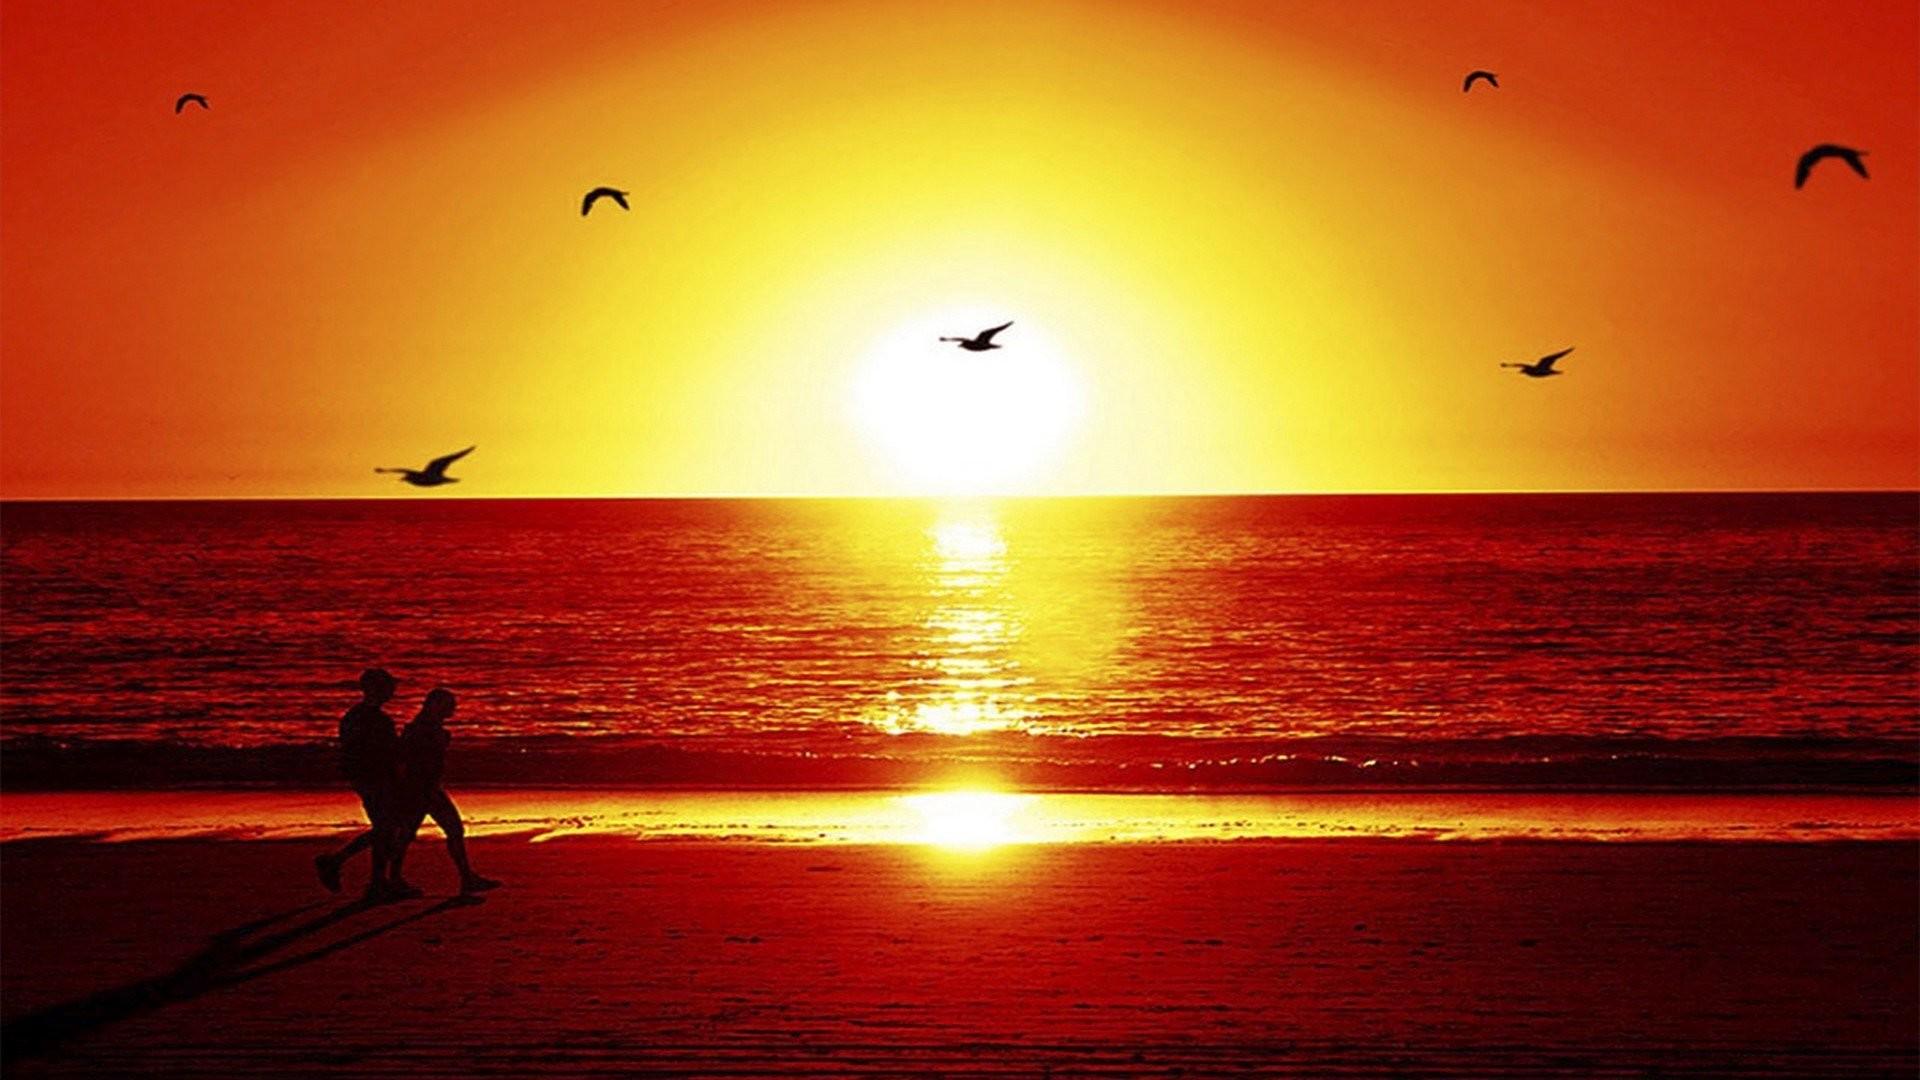 Beach Sunset Wallpaper background picture